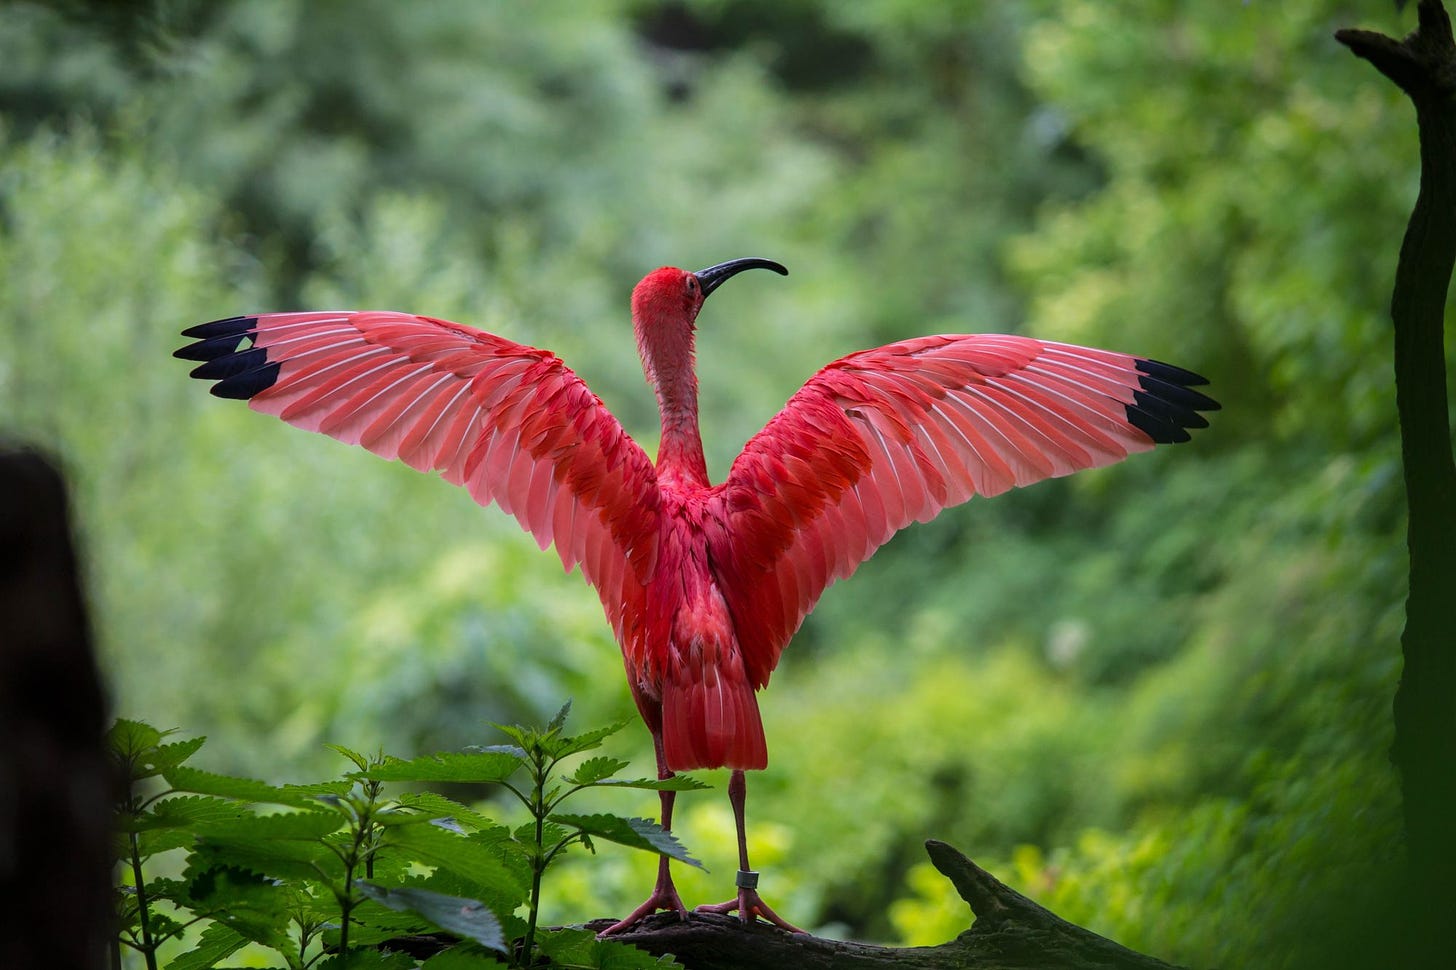 pink bird with wings spread